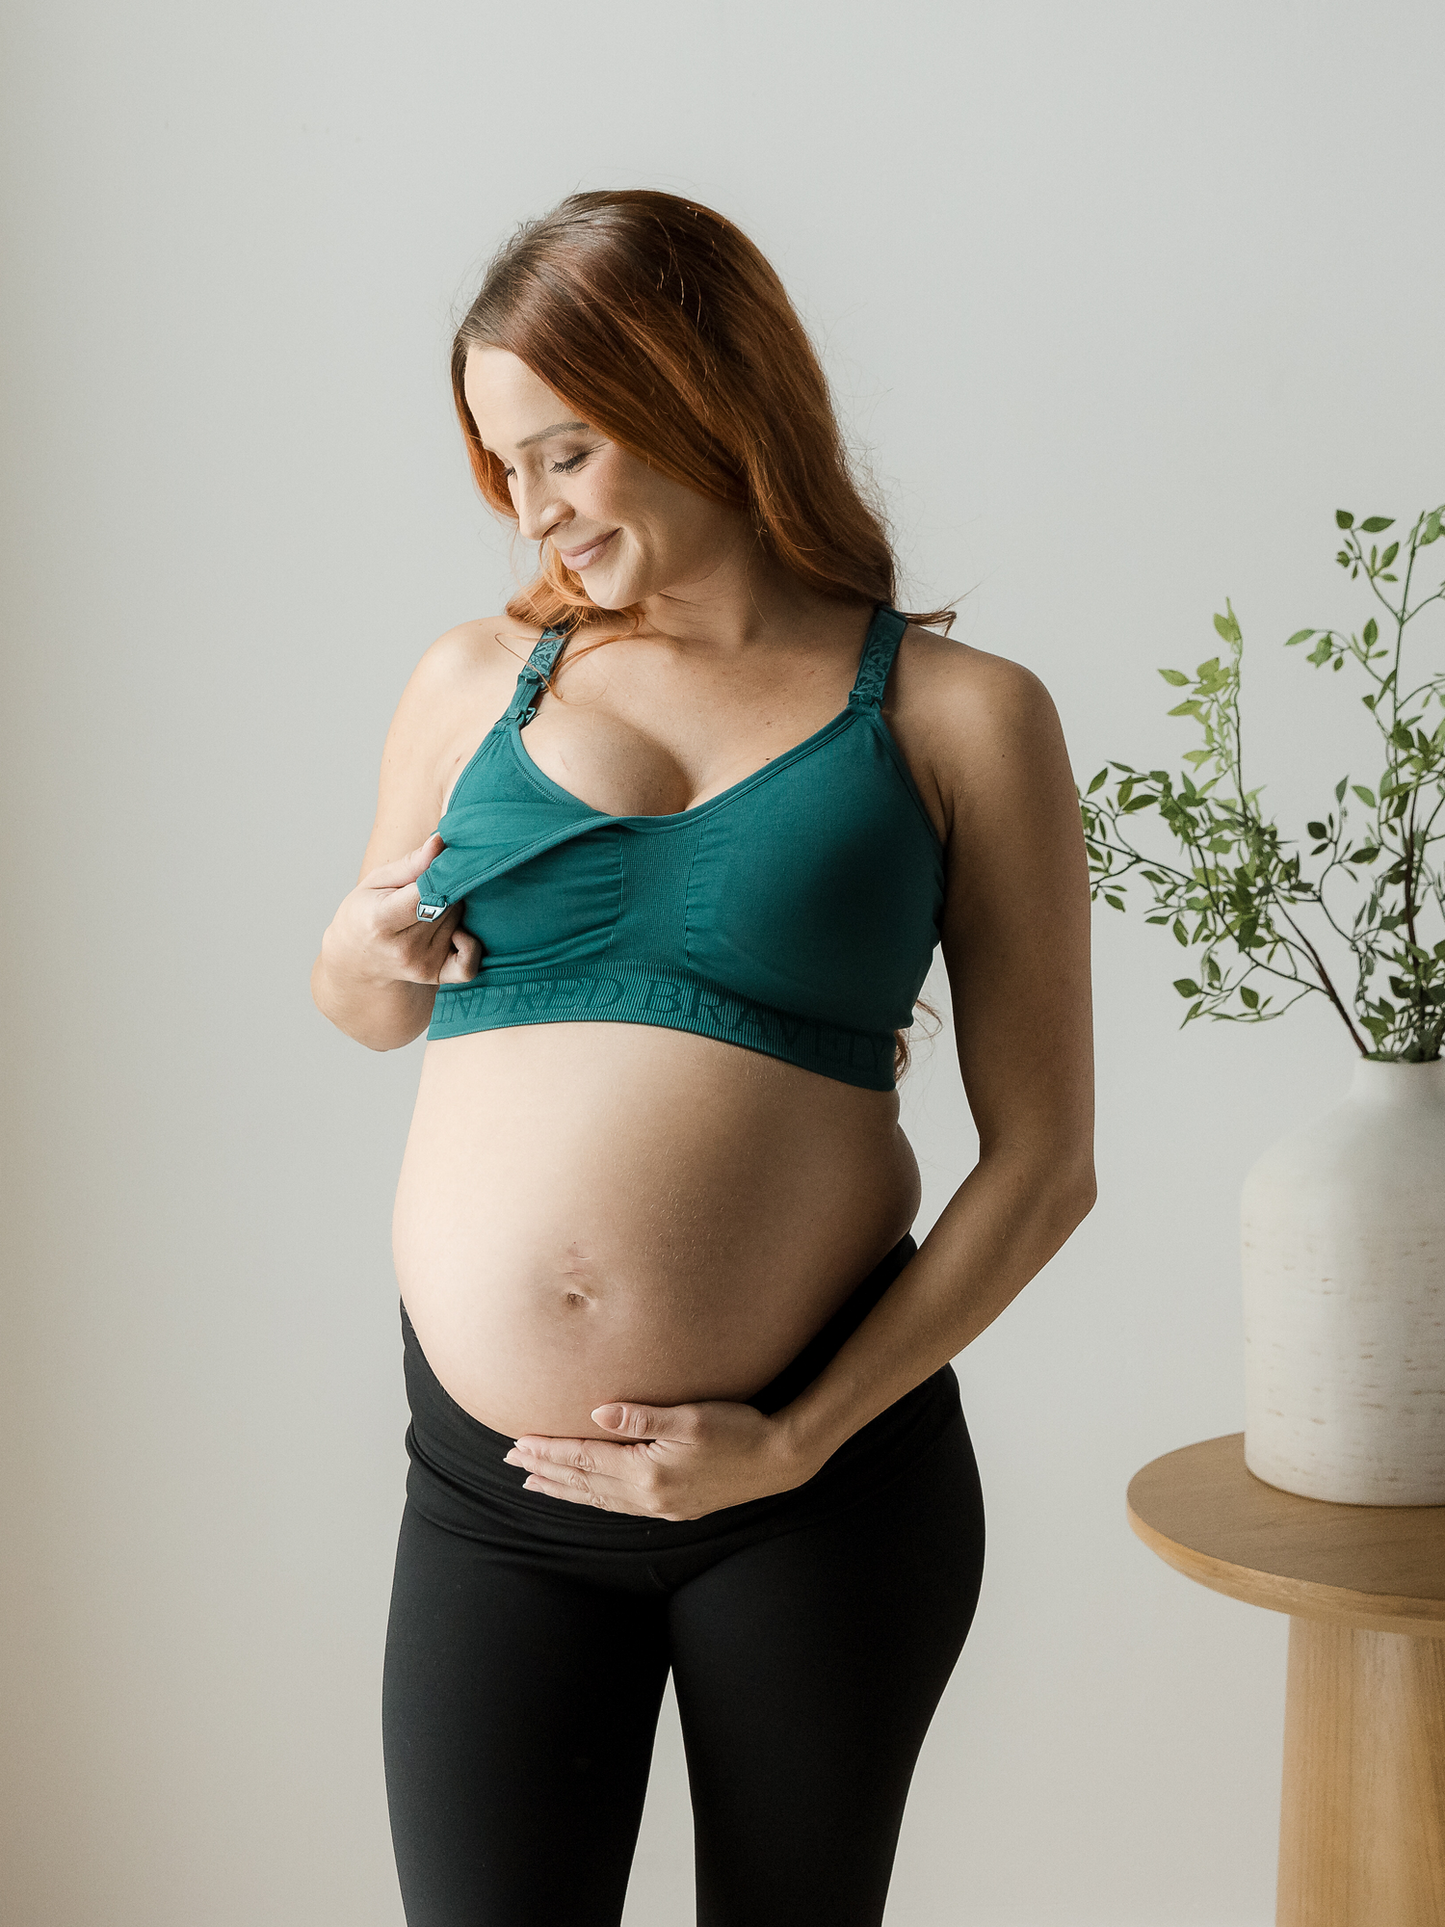 Pregnant model wearing the Sublime® Hands-Free Pumping & Nursing Sports Bra in Teal.